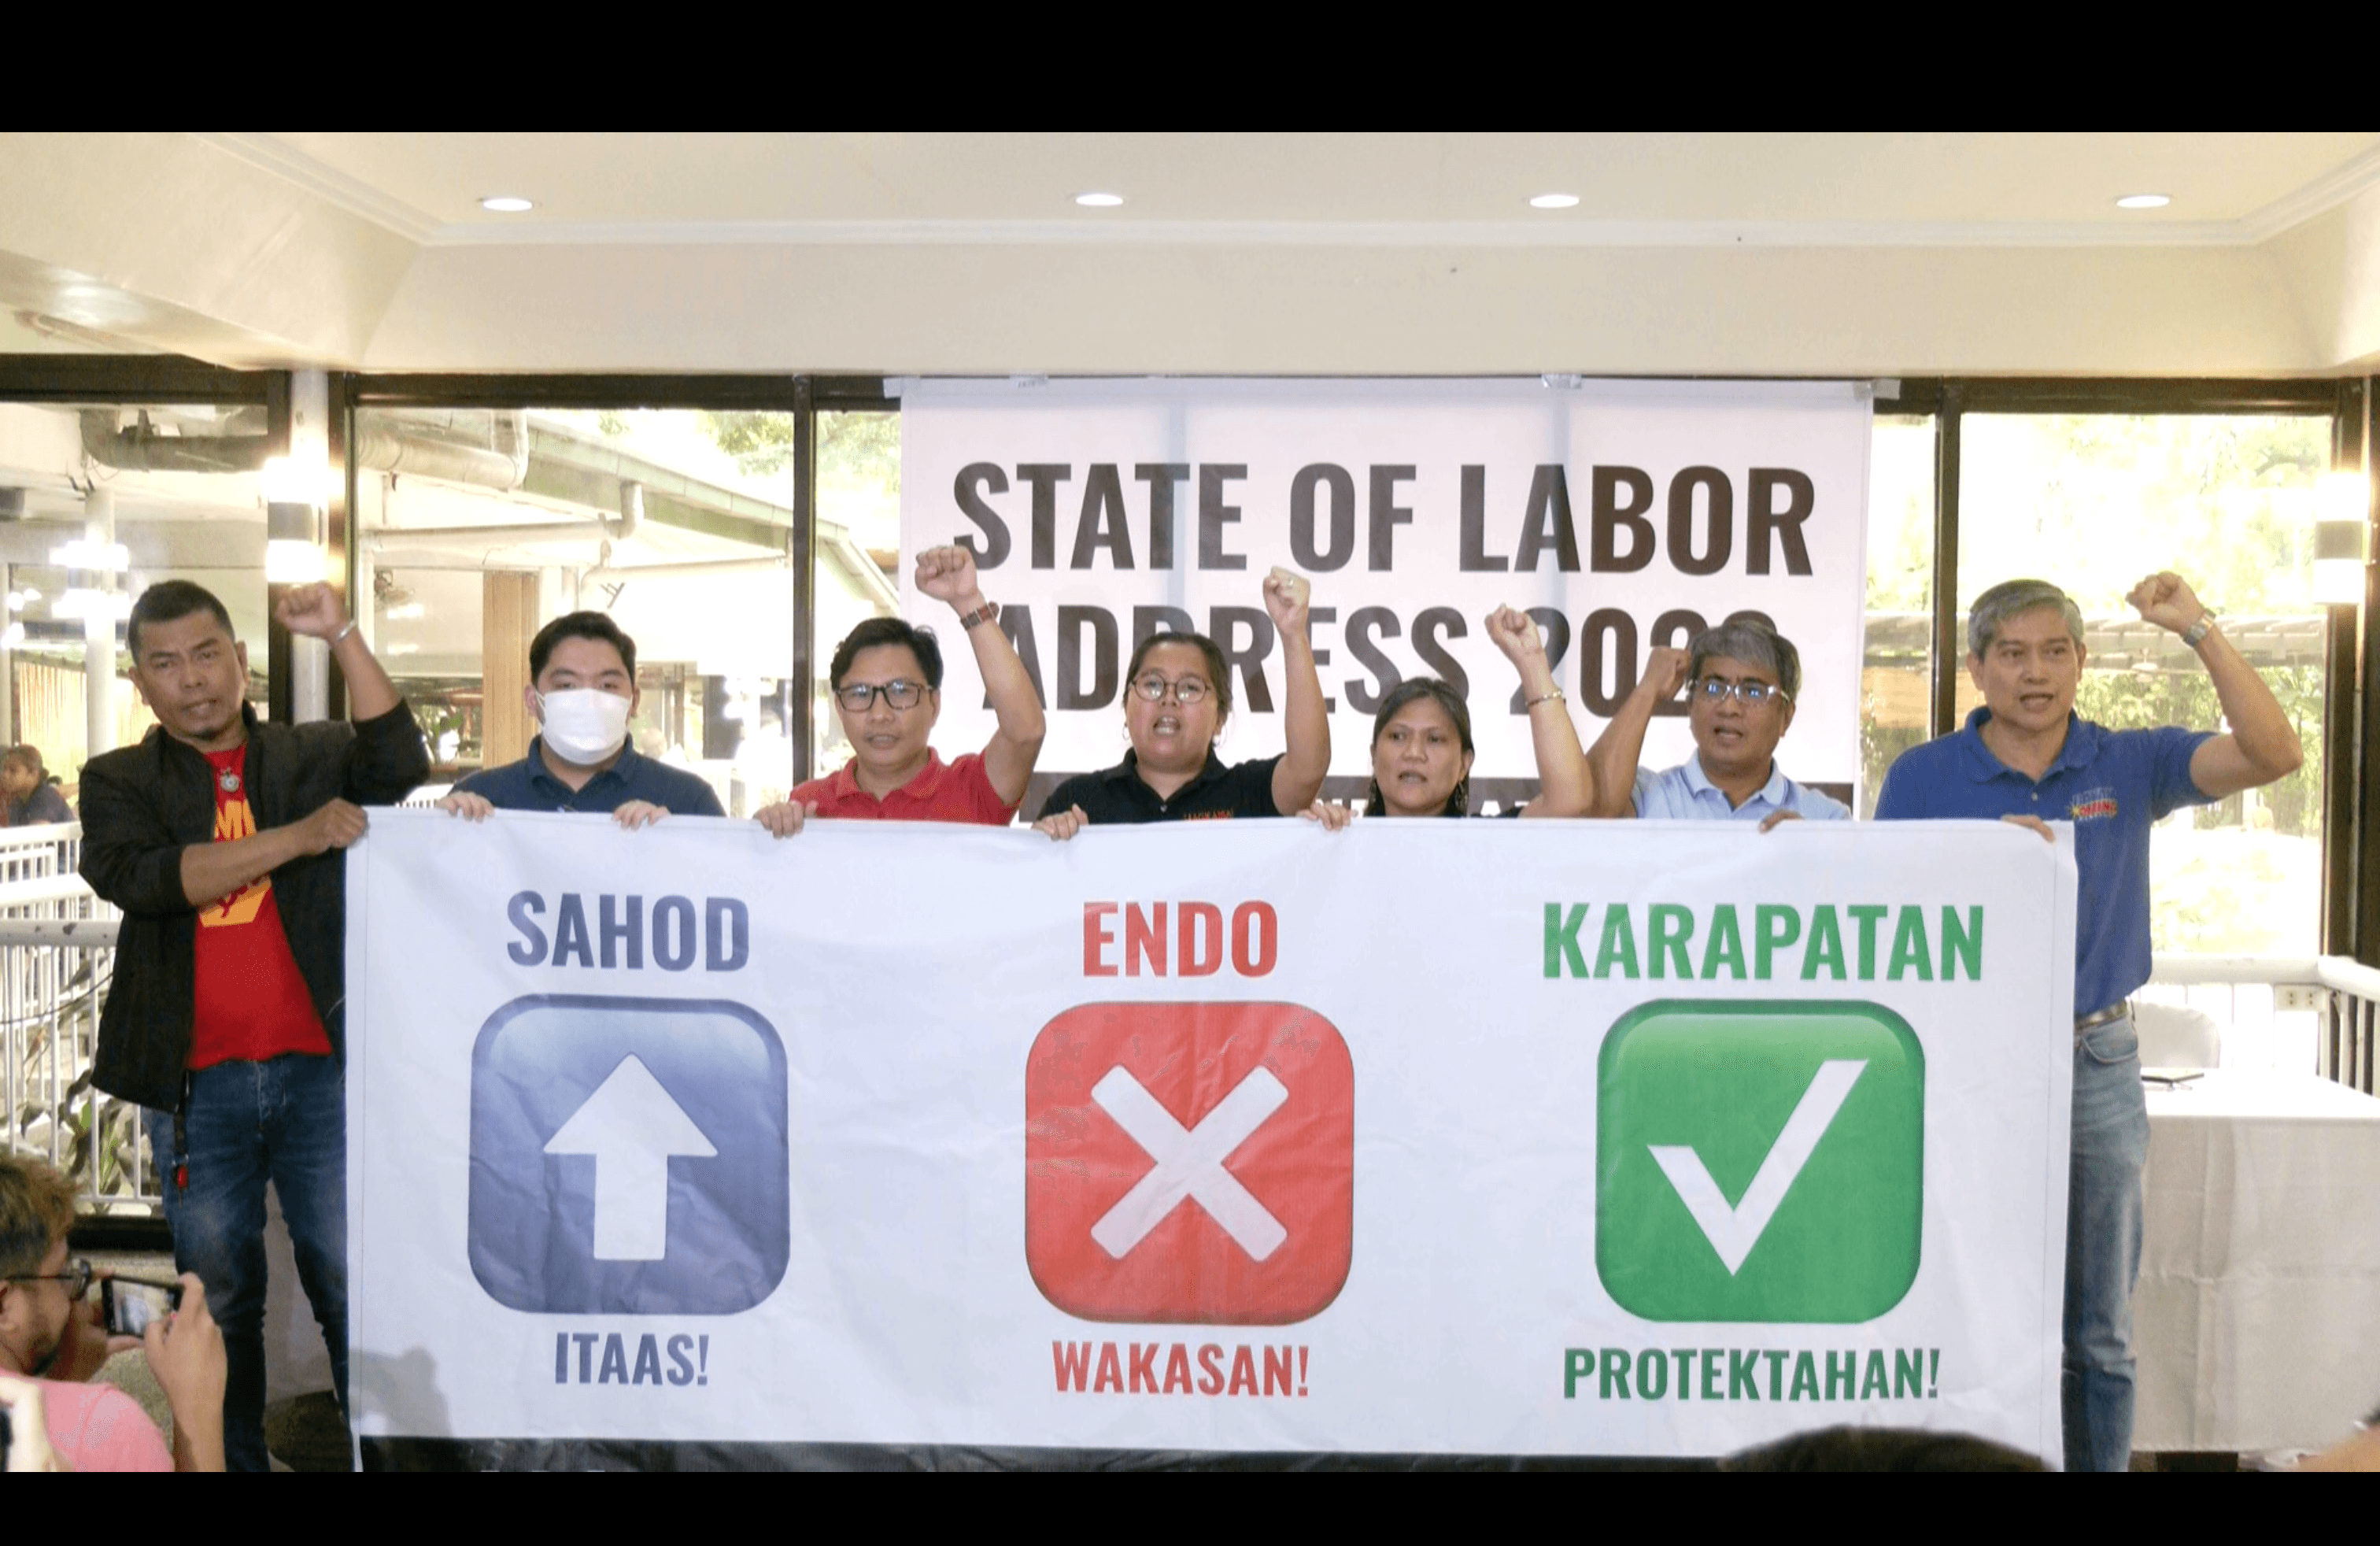 Labor groups seek better protection in freedom to associate